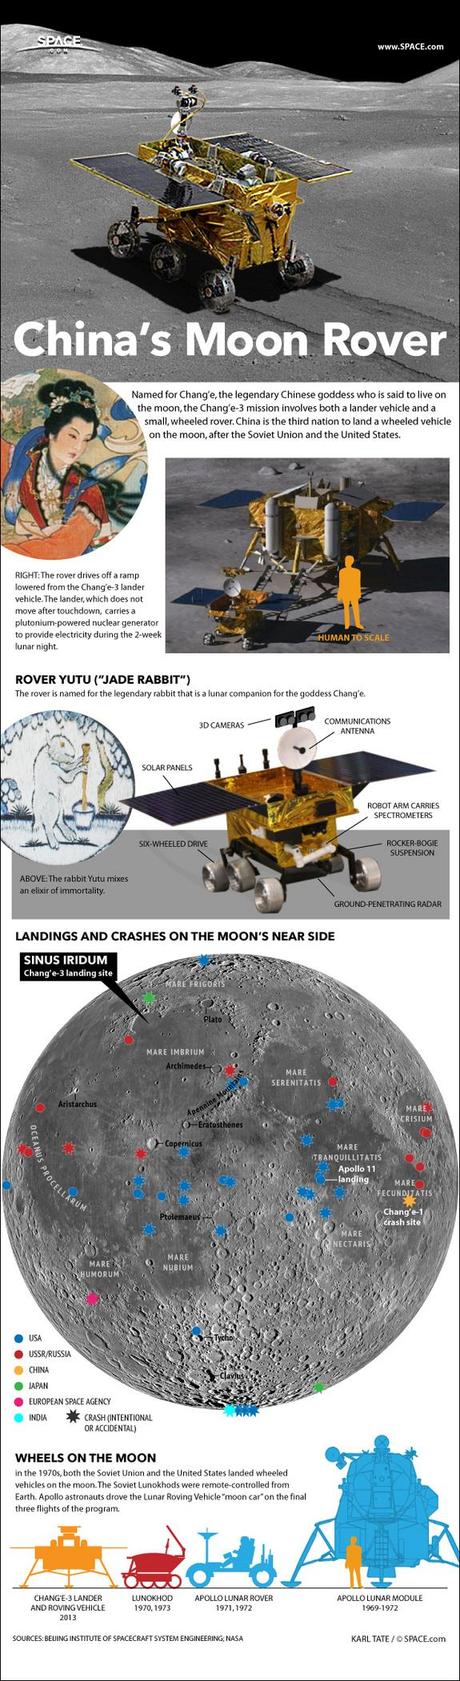 Infographic: Details of China's Chang'e-3 moon lander and rover.